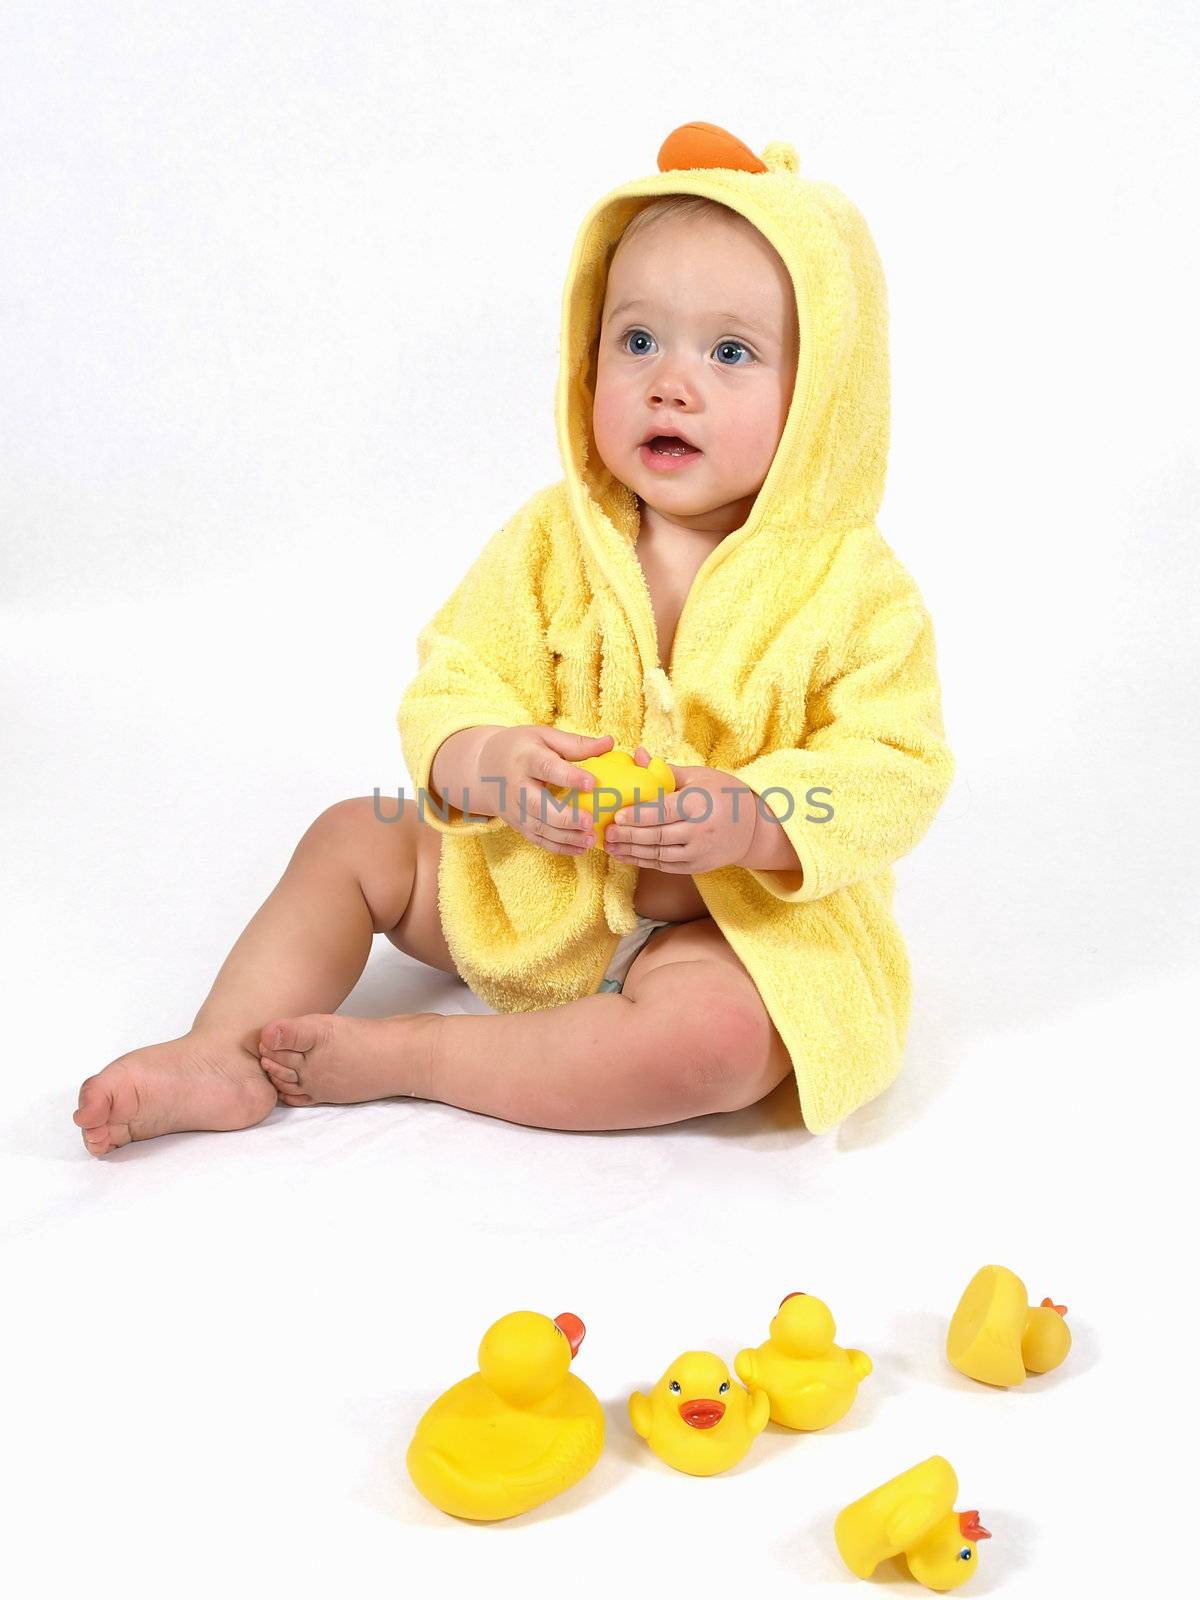 A baby girl in a yellow duck bathrobe holds a plastic toy rubber duck.